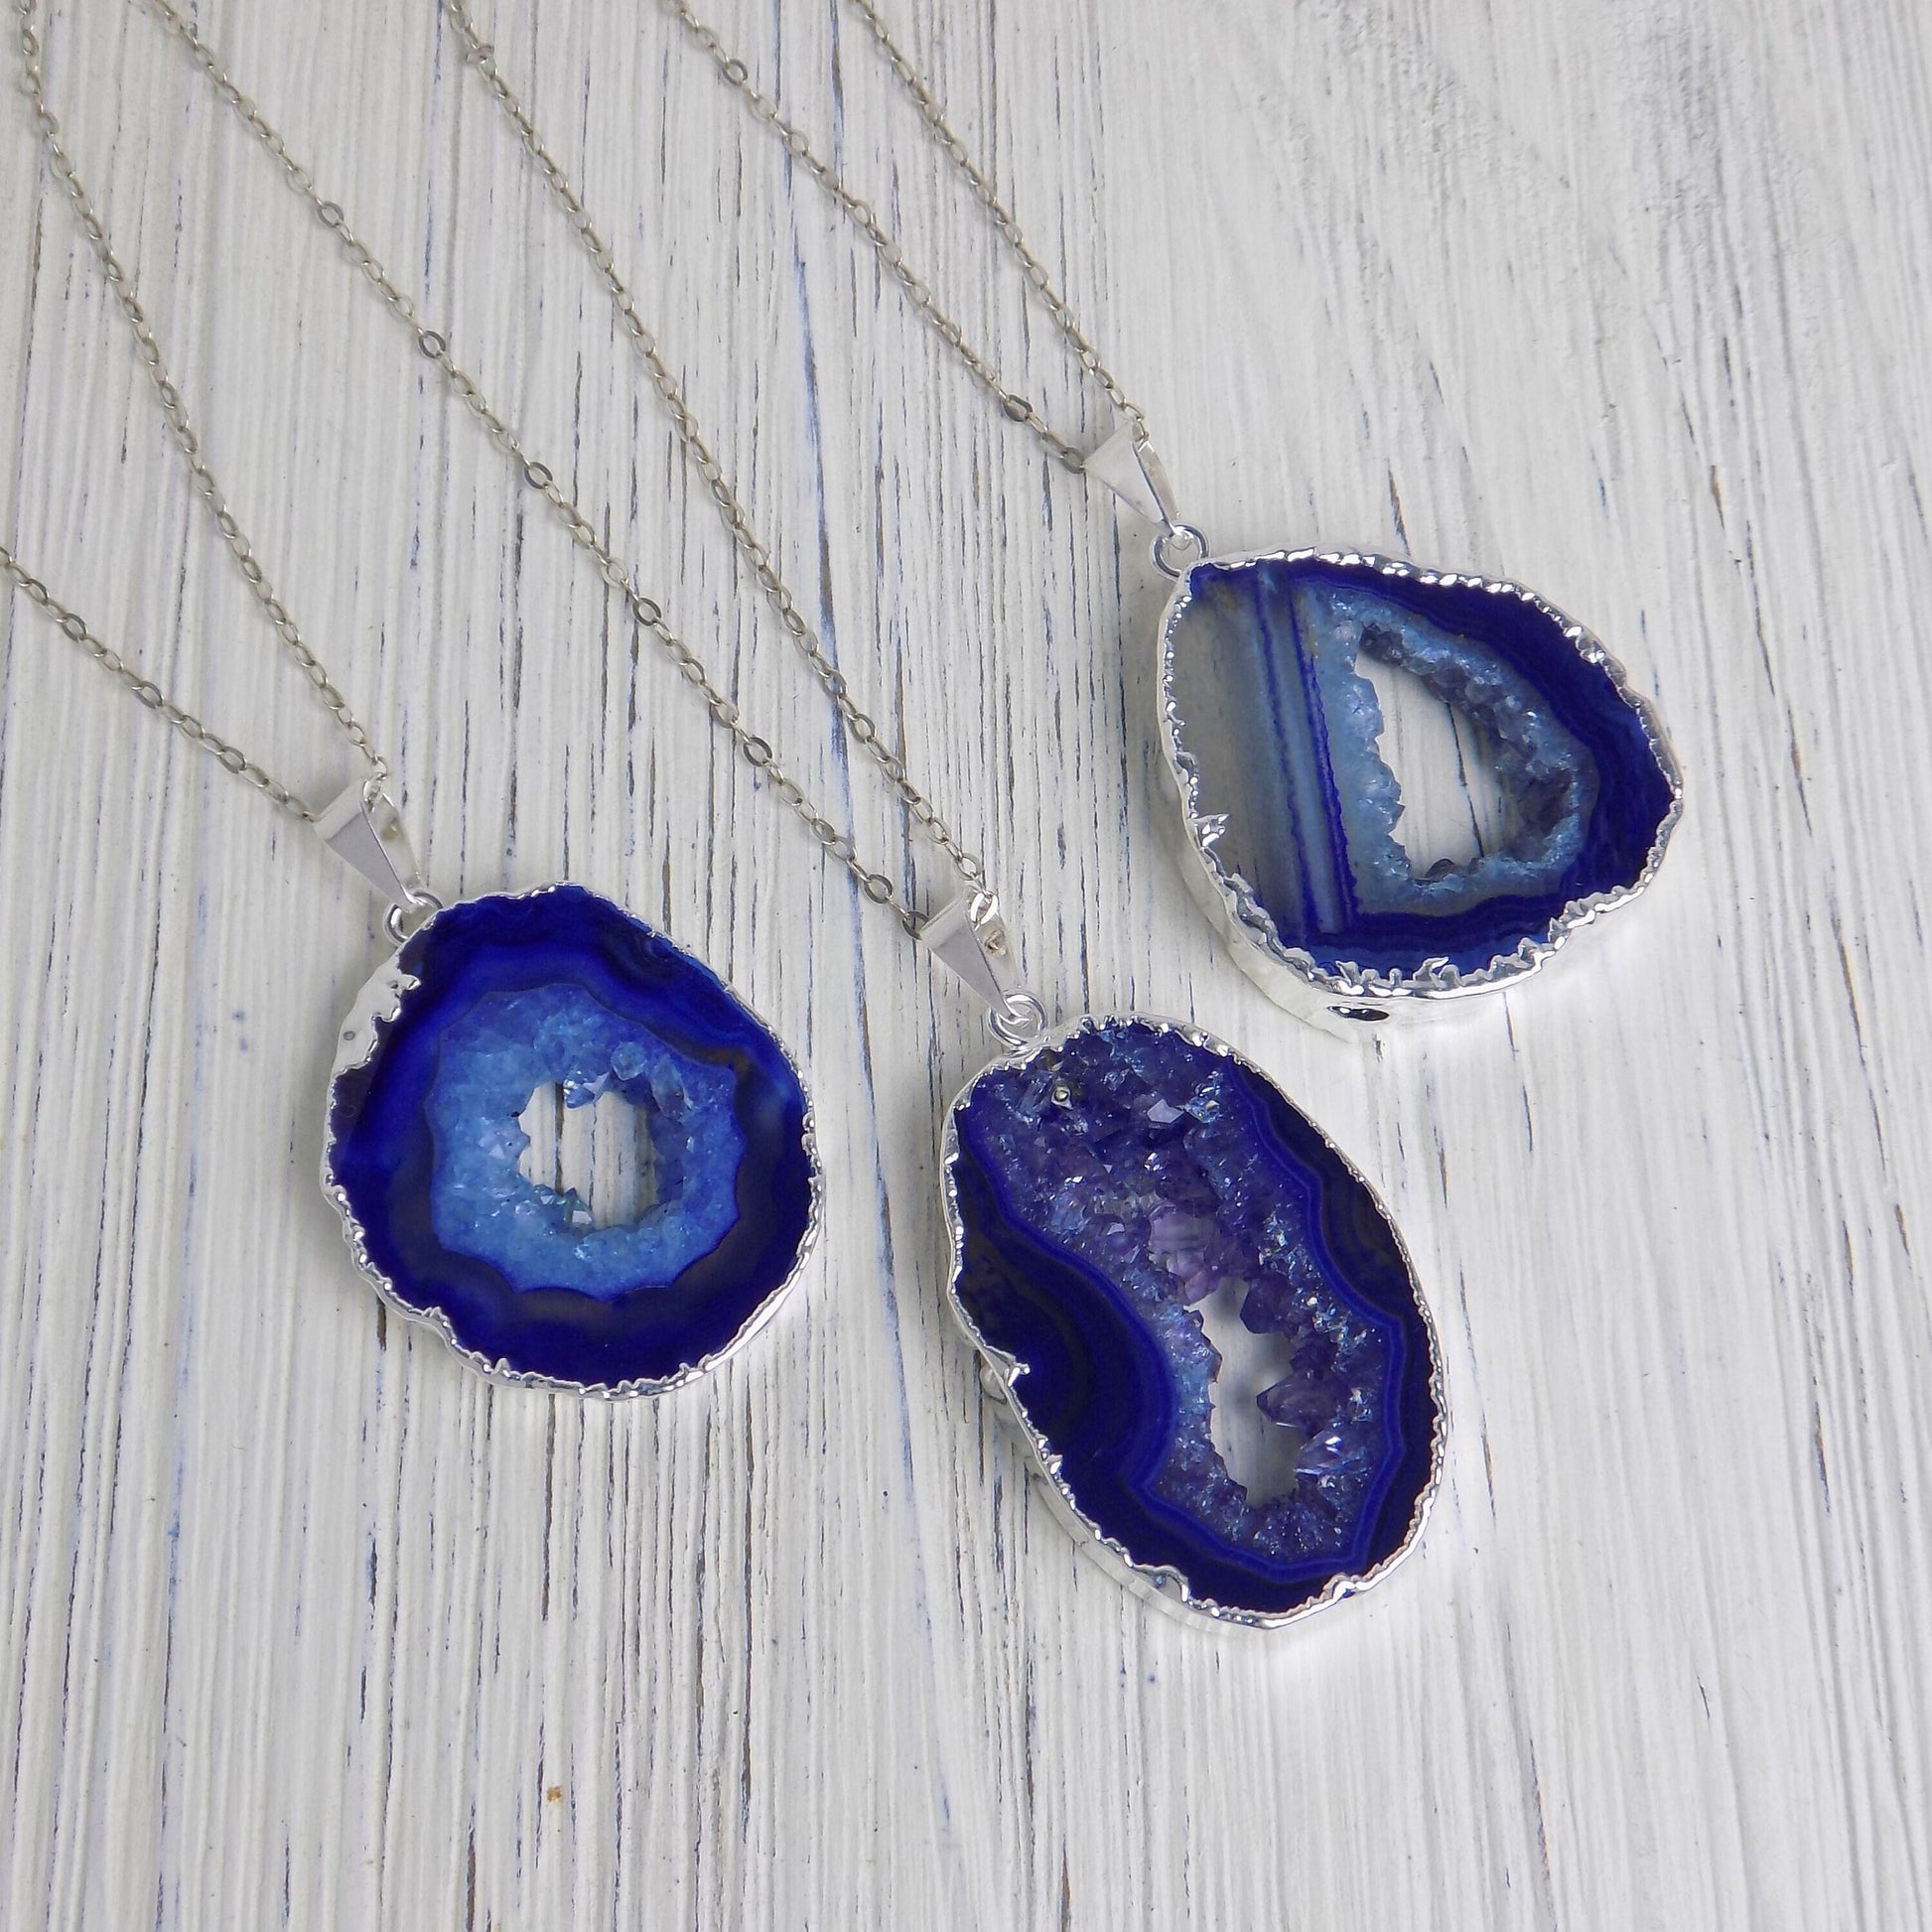 Small Geode Necklace Silver, Blue Raw Stone Necklace, Druzy Necklace, Boho Crystal Pendants Silver Chain, G14-21